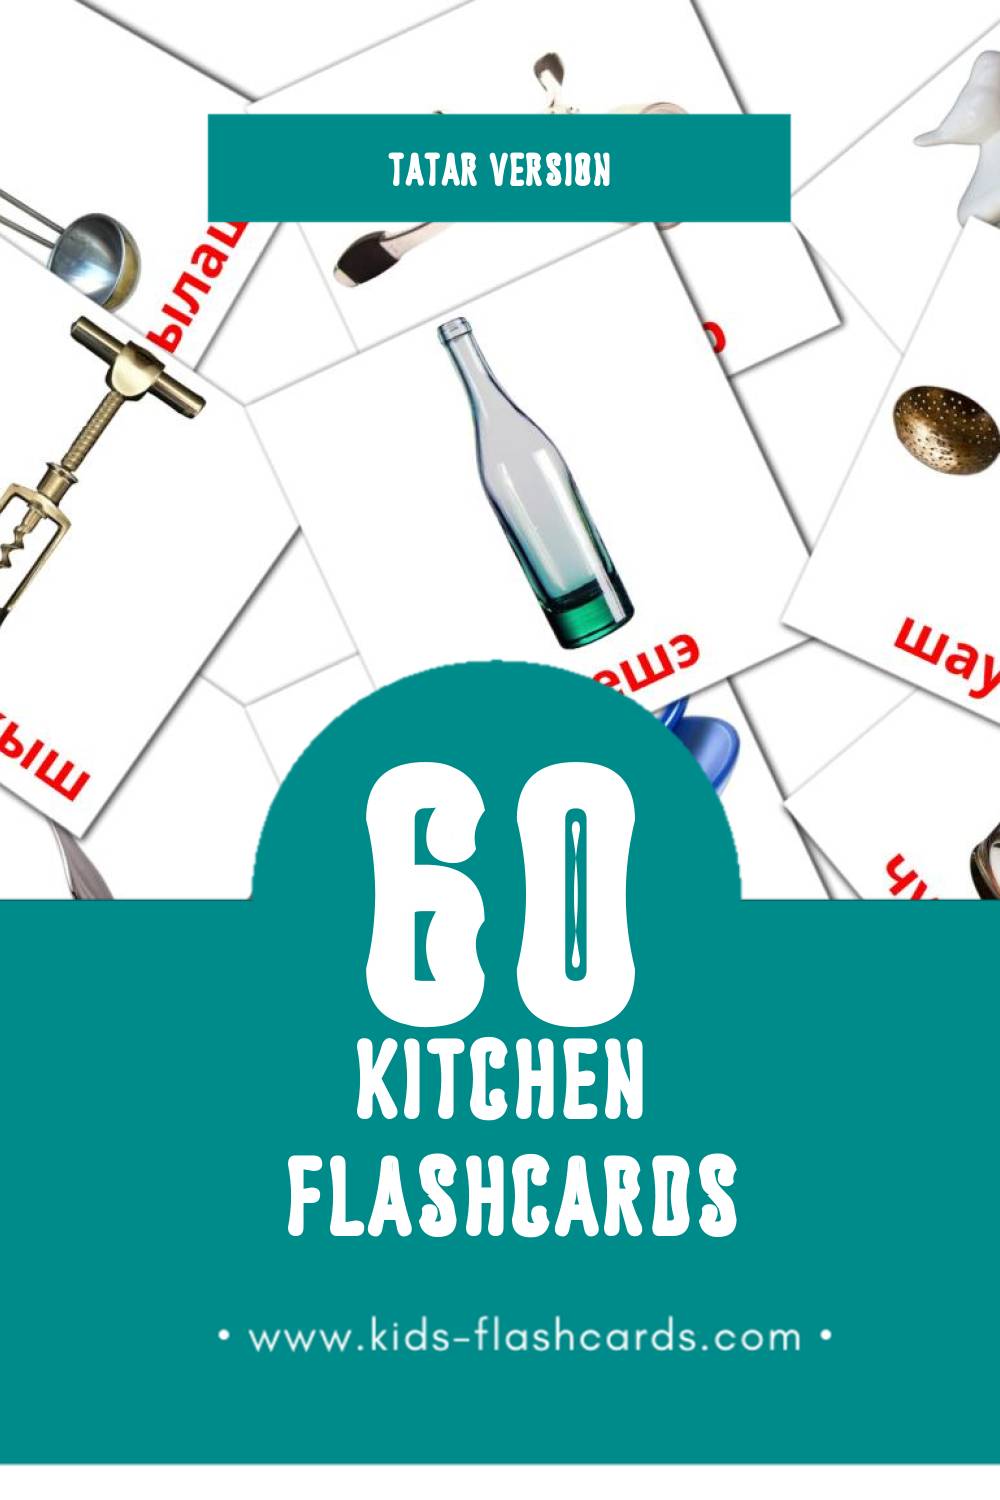 Visual Ашханә Flashcards for Toddlers (60 cards in Tatar)